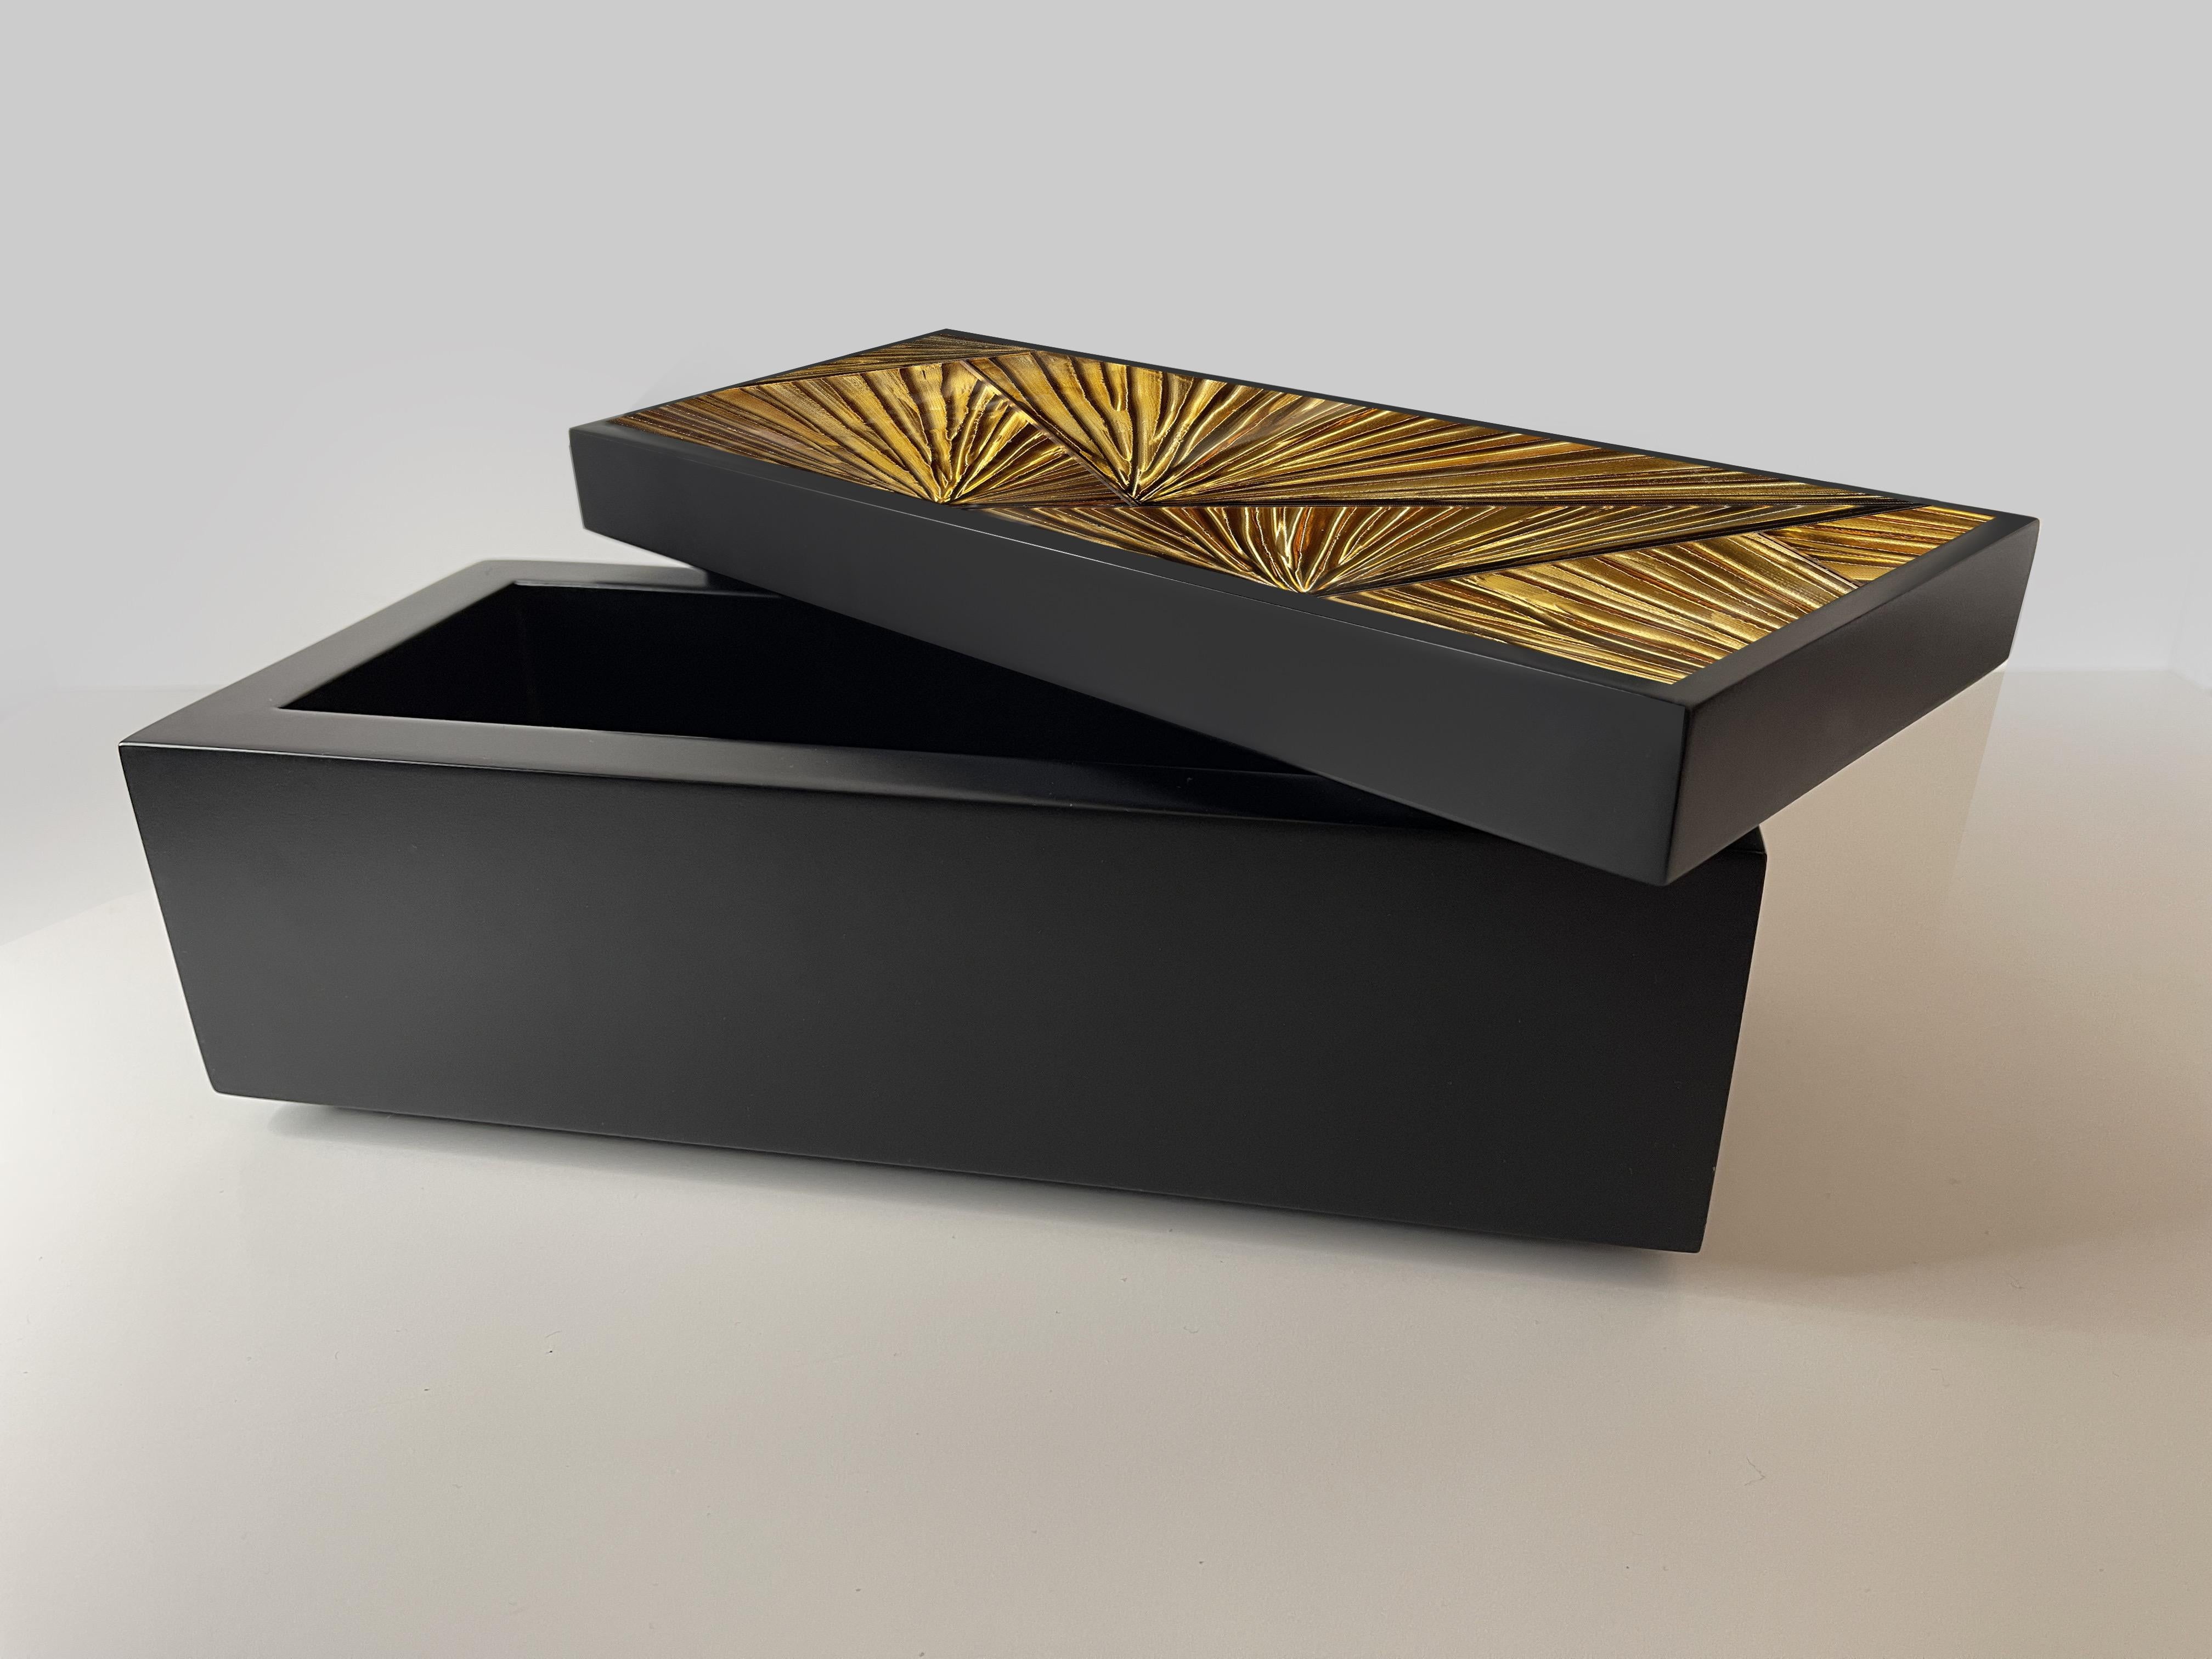 Modern Contemporary Jewelry Box Handmade Black Wood and Engraved Glass by Ghirò Studio For Sale